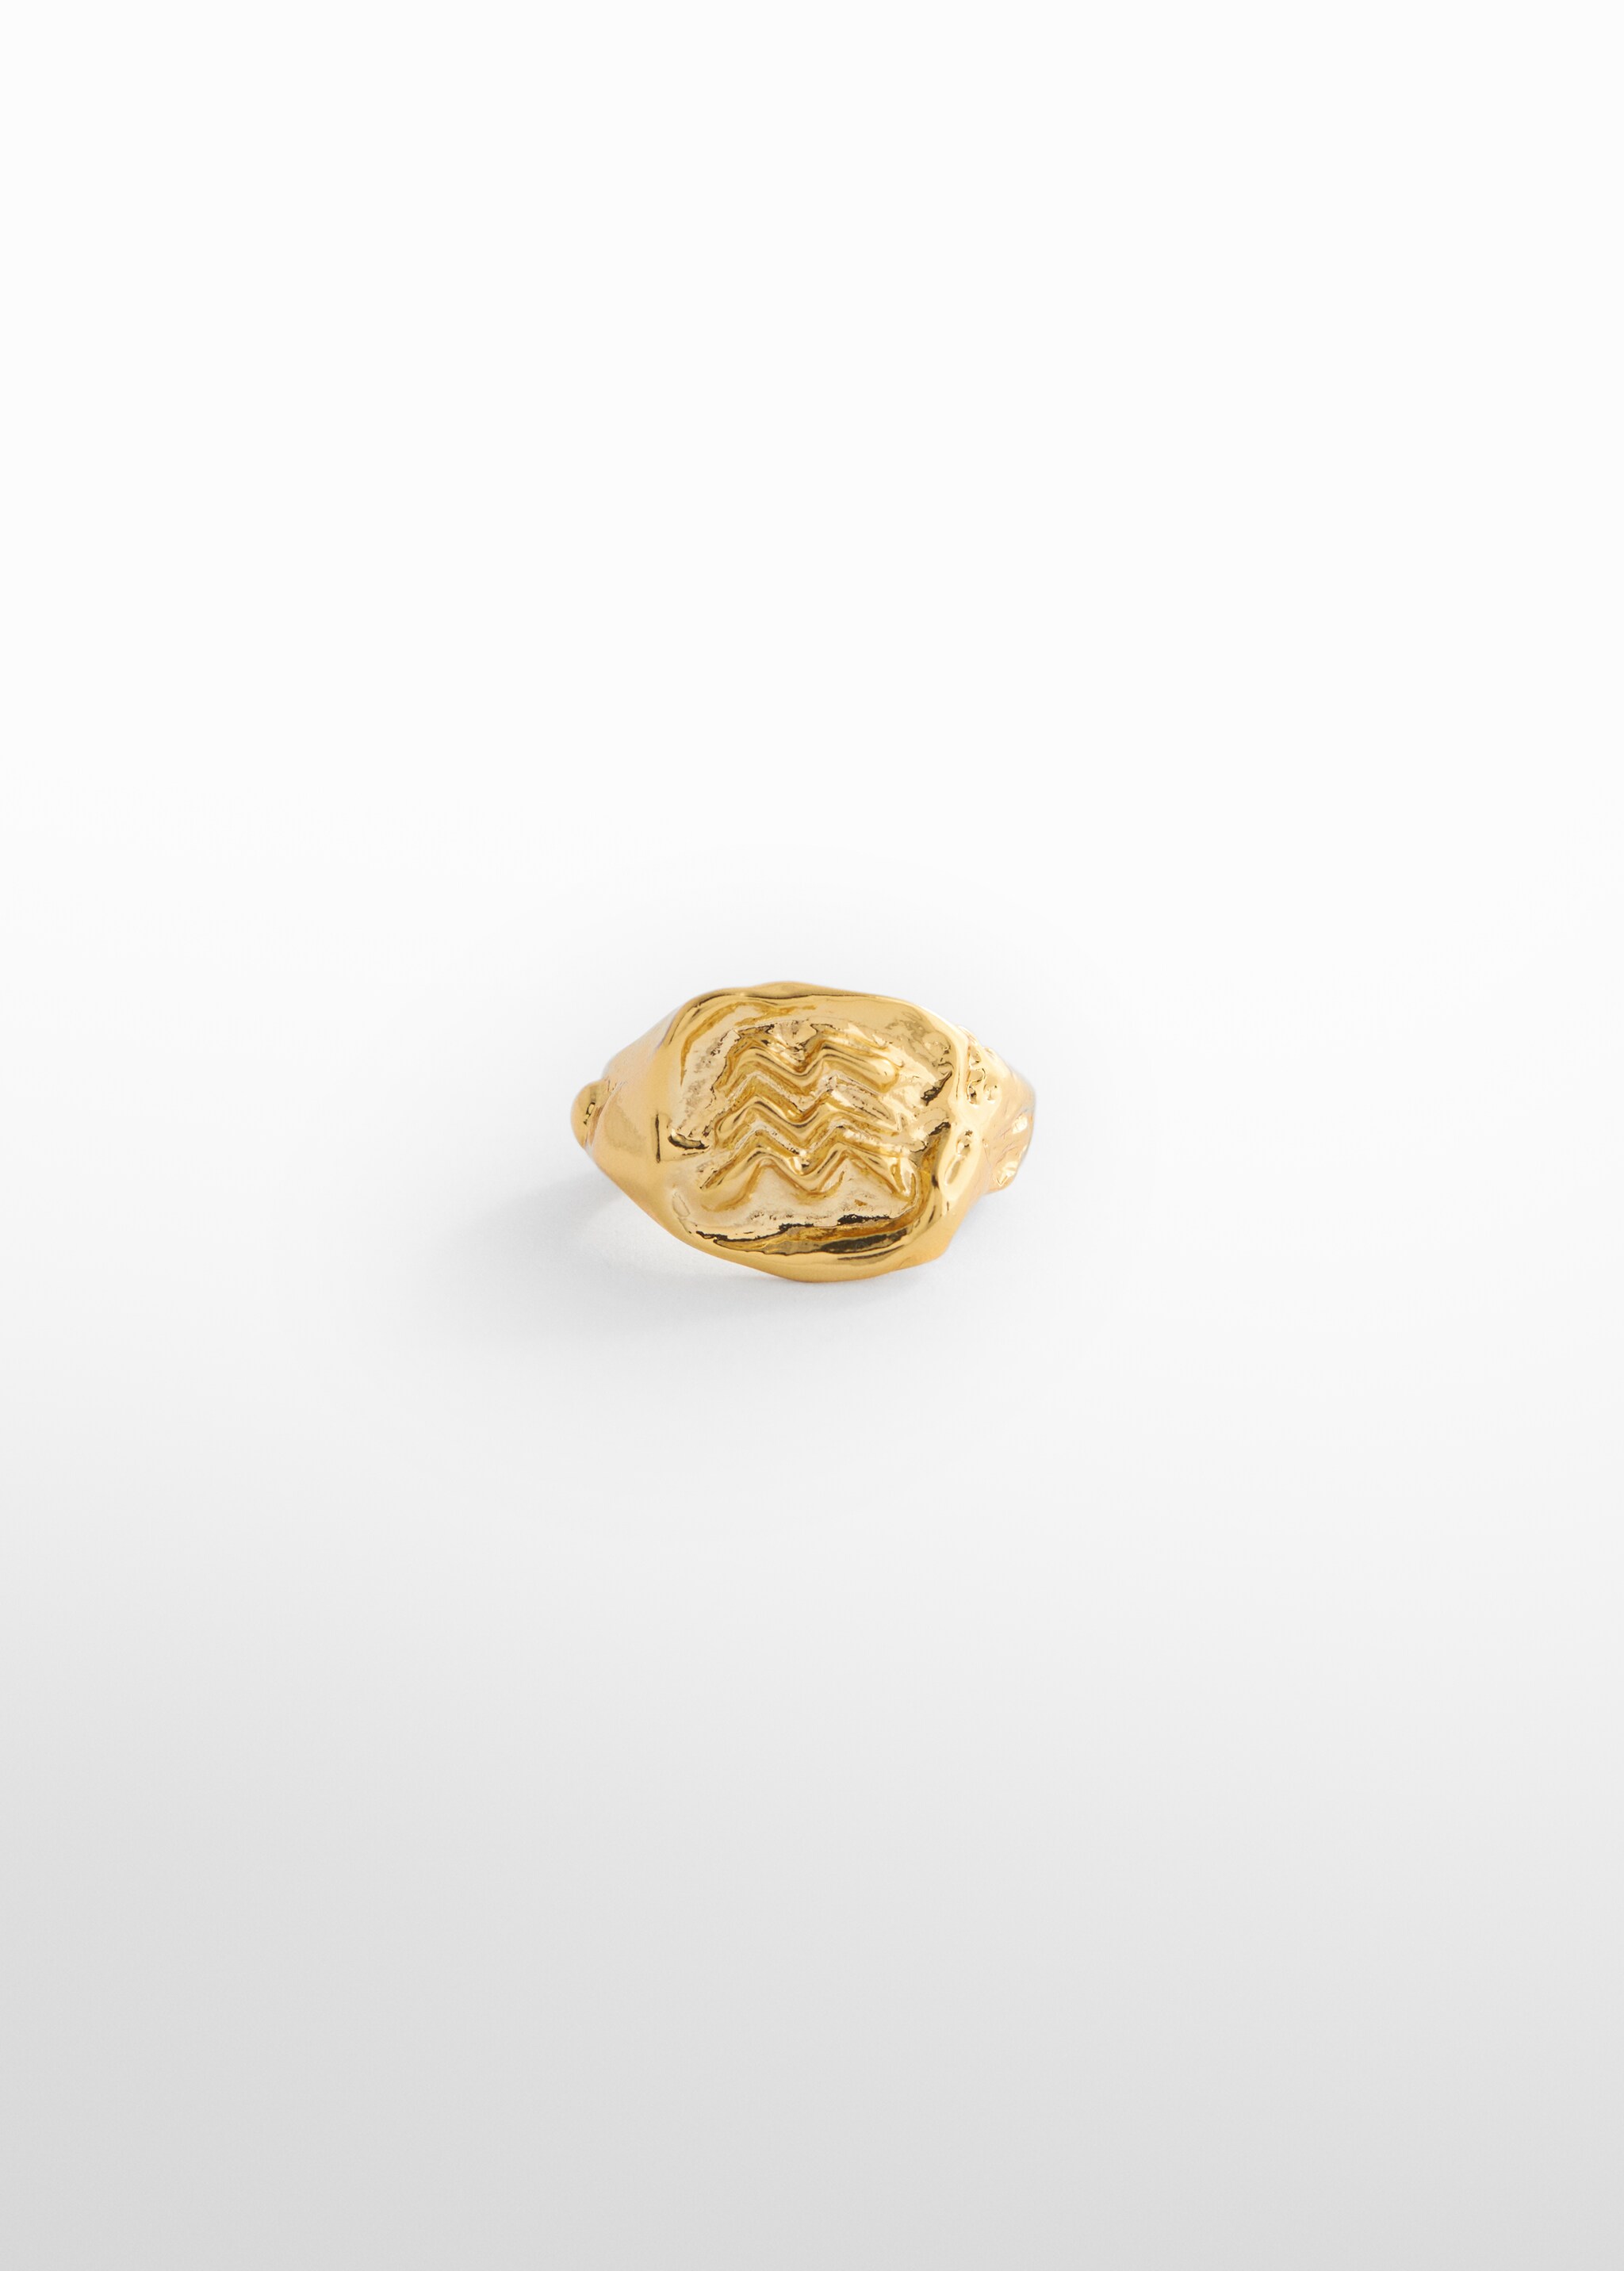 Embossed signet ring - Article without model